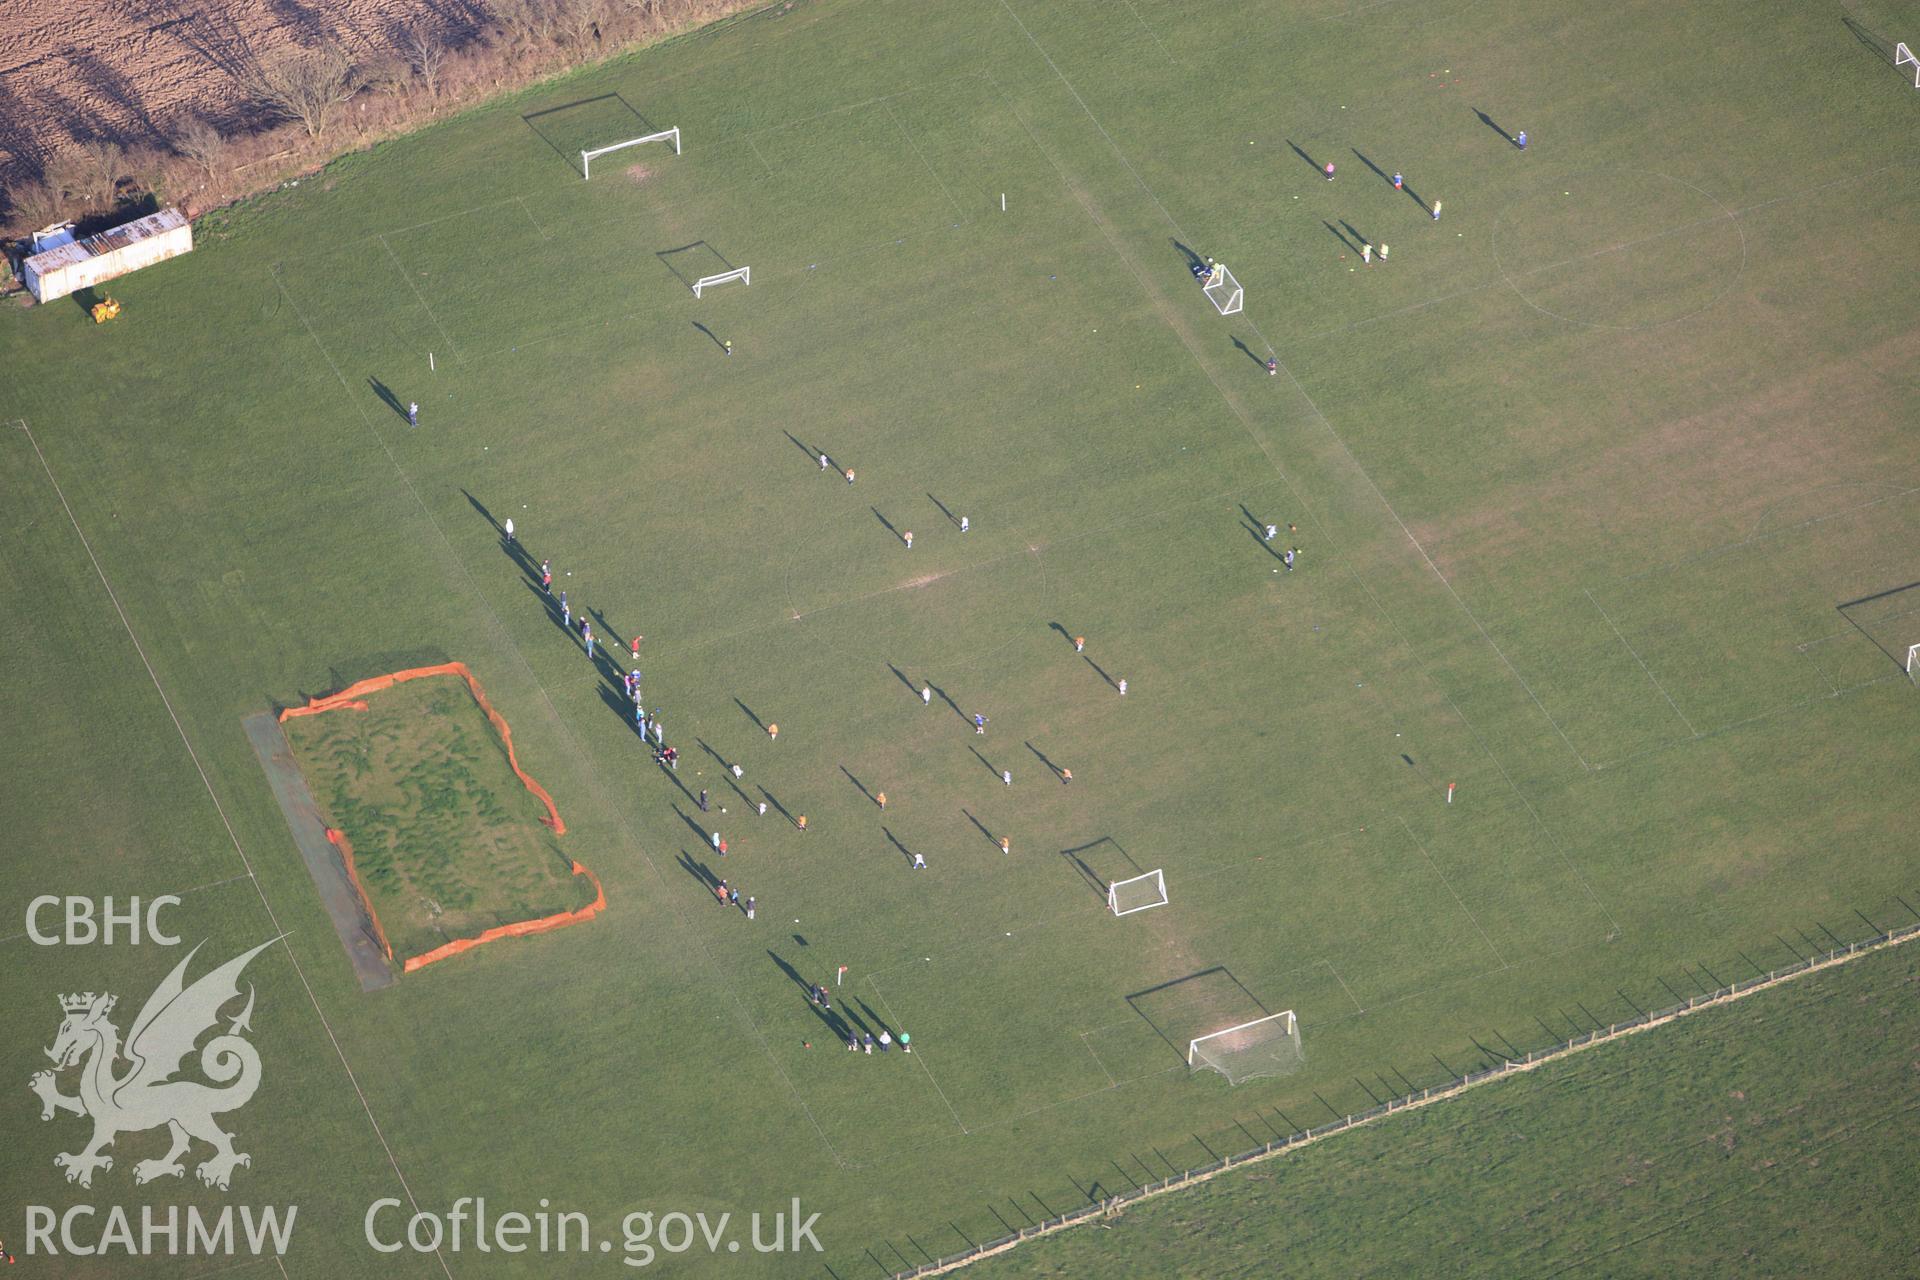 RCAHMW colour oblique aerial photograph of football tournament, Camrose Village. Taken on 13 April 2010 by Toby Driver